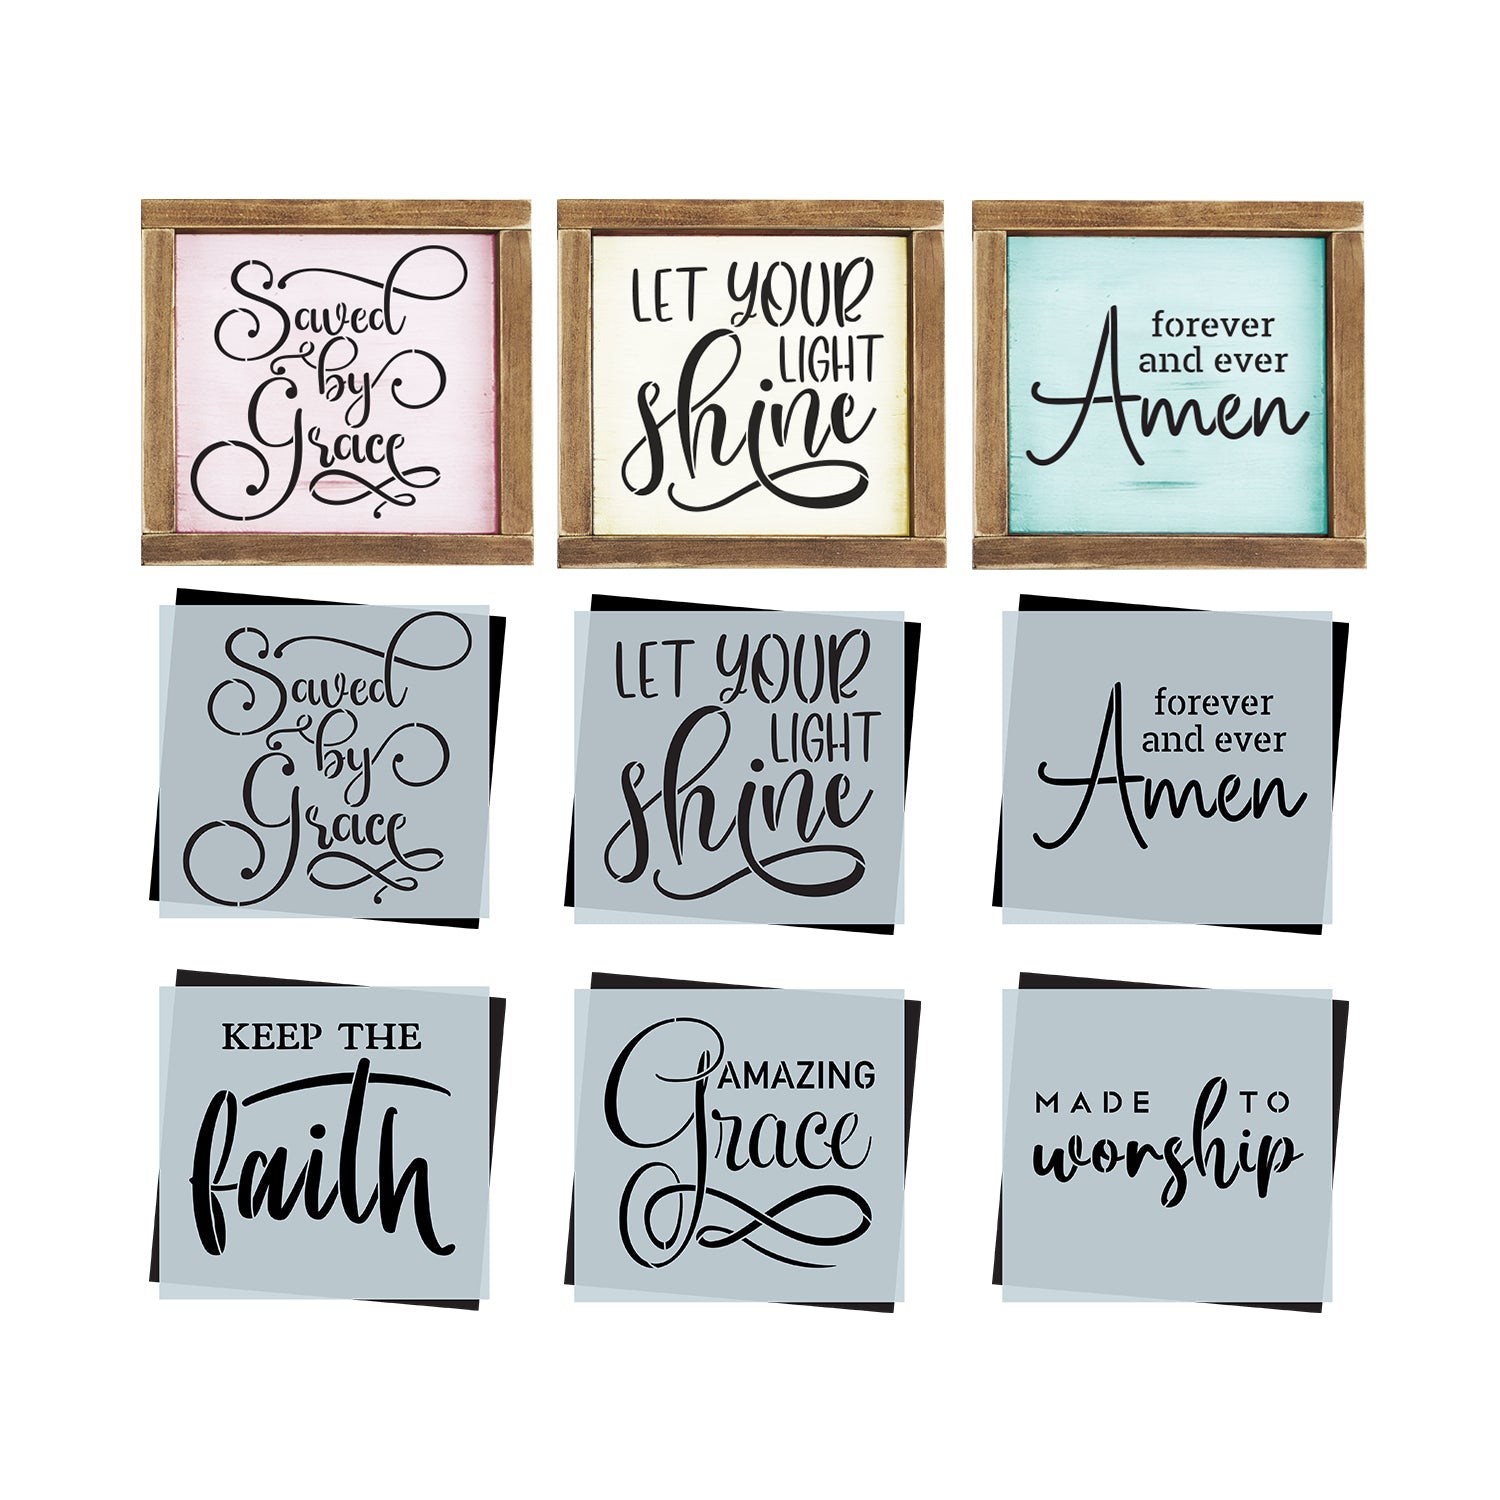 DIY reusable farmhouse Christian religion wood sign stencils, scripture tiered tray signs, faith arts and crafts,  bible verse mini wood signs, home decor, upclycling,  saved by grace, let your light shine, forever and ever amen, keep the faith, amazing grace, made to worship